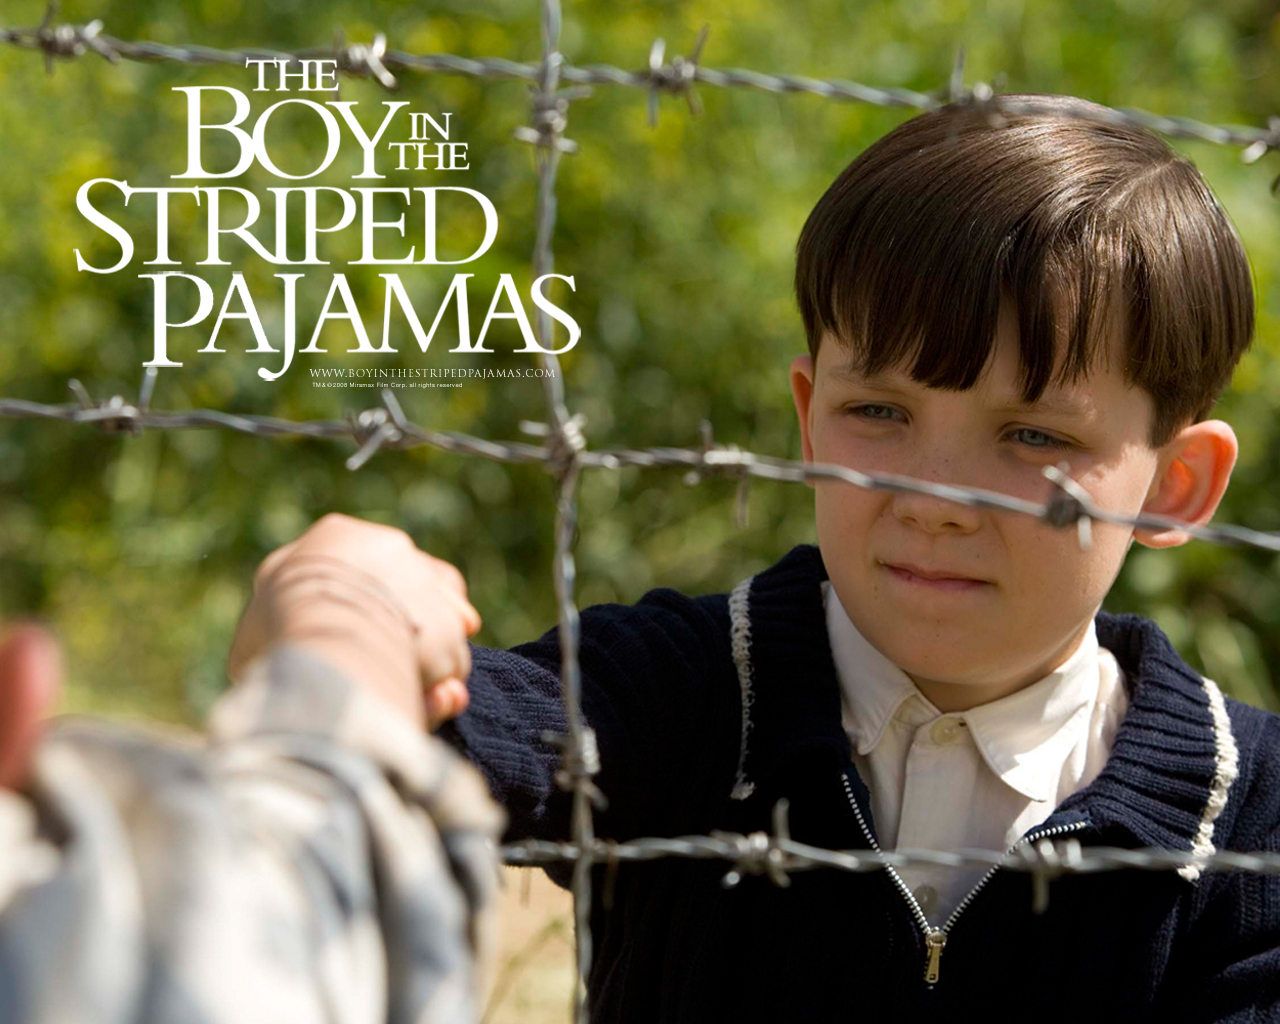 The Boy in the Striped Pajamas Wallpaper. Boy in striped pyjamas, Striped pyjamas, Boys